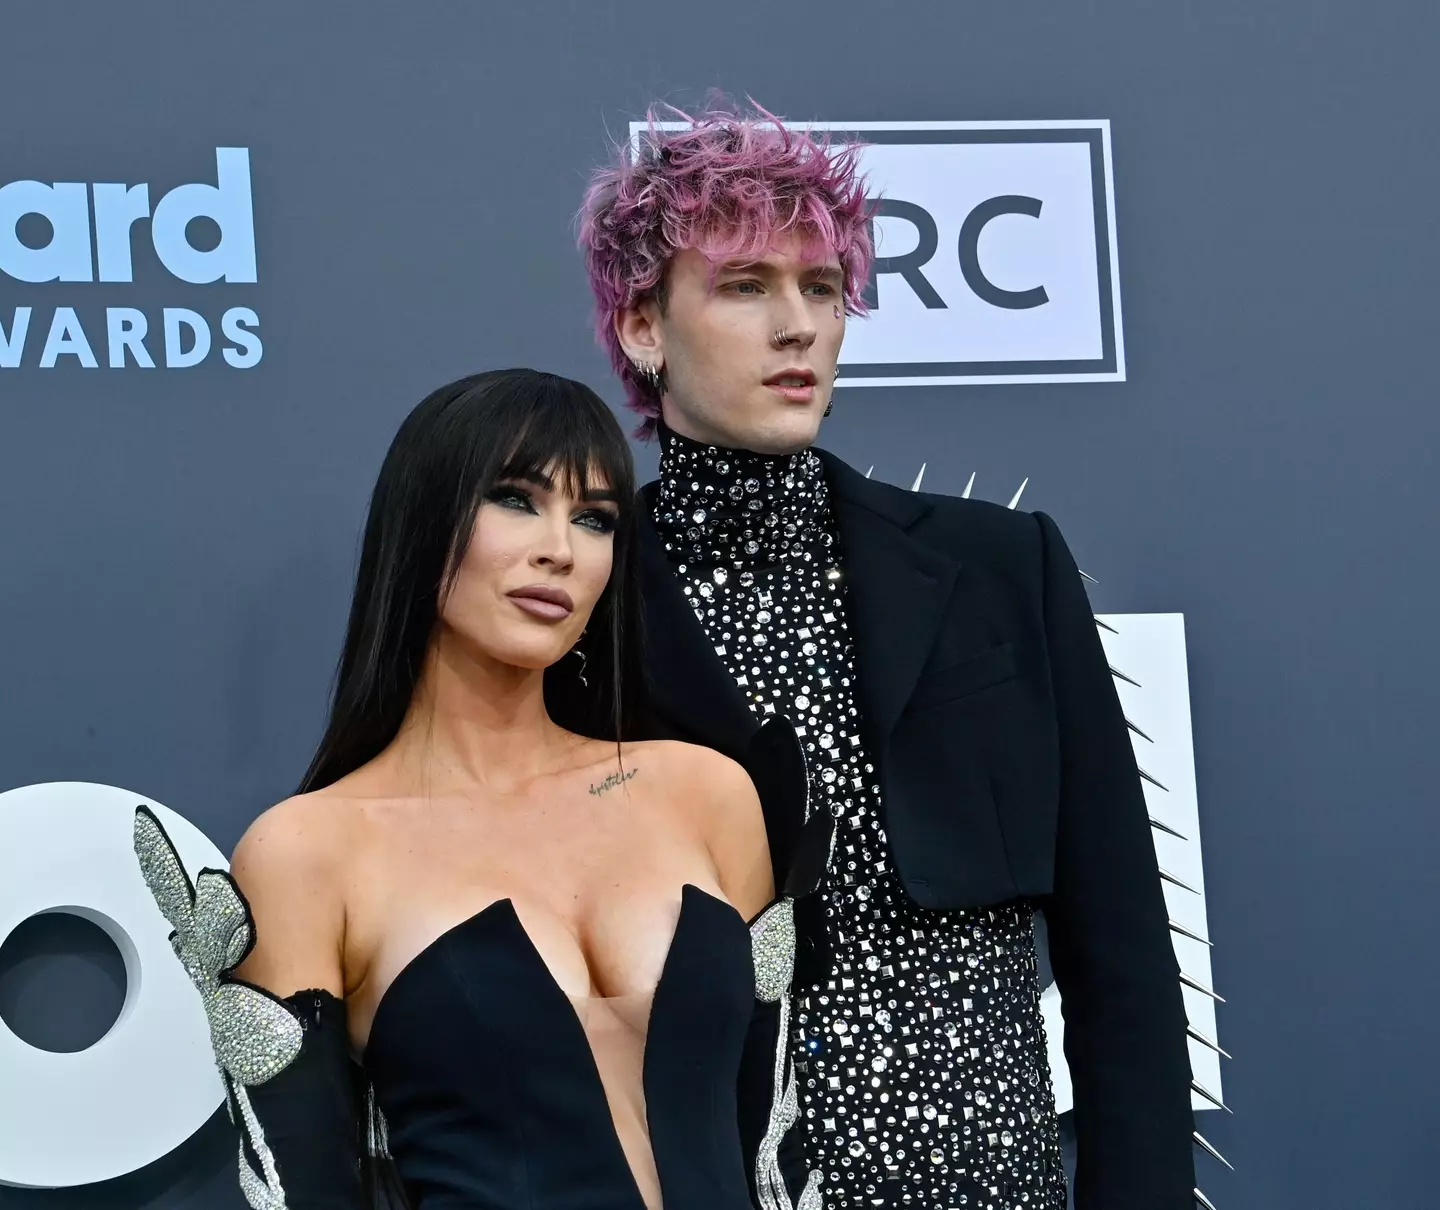 Machine Gun Kelly dedicated his Billboard Awards performance to his 'wife' and 'unborn' child.